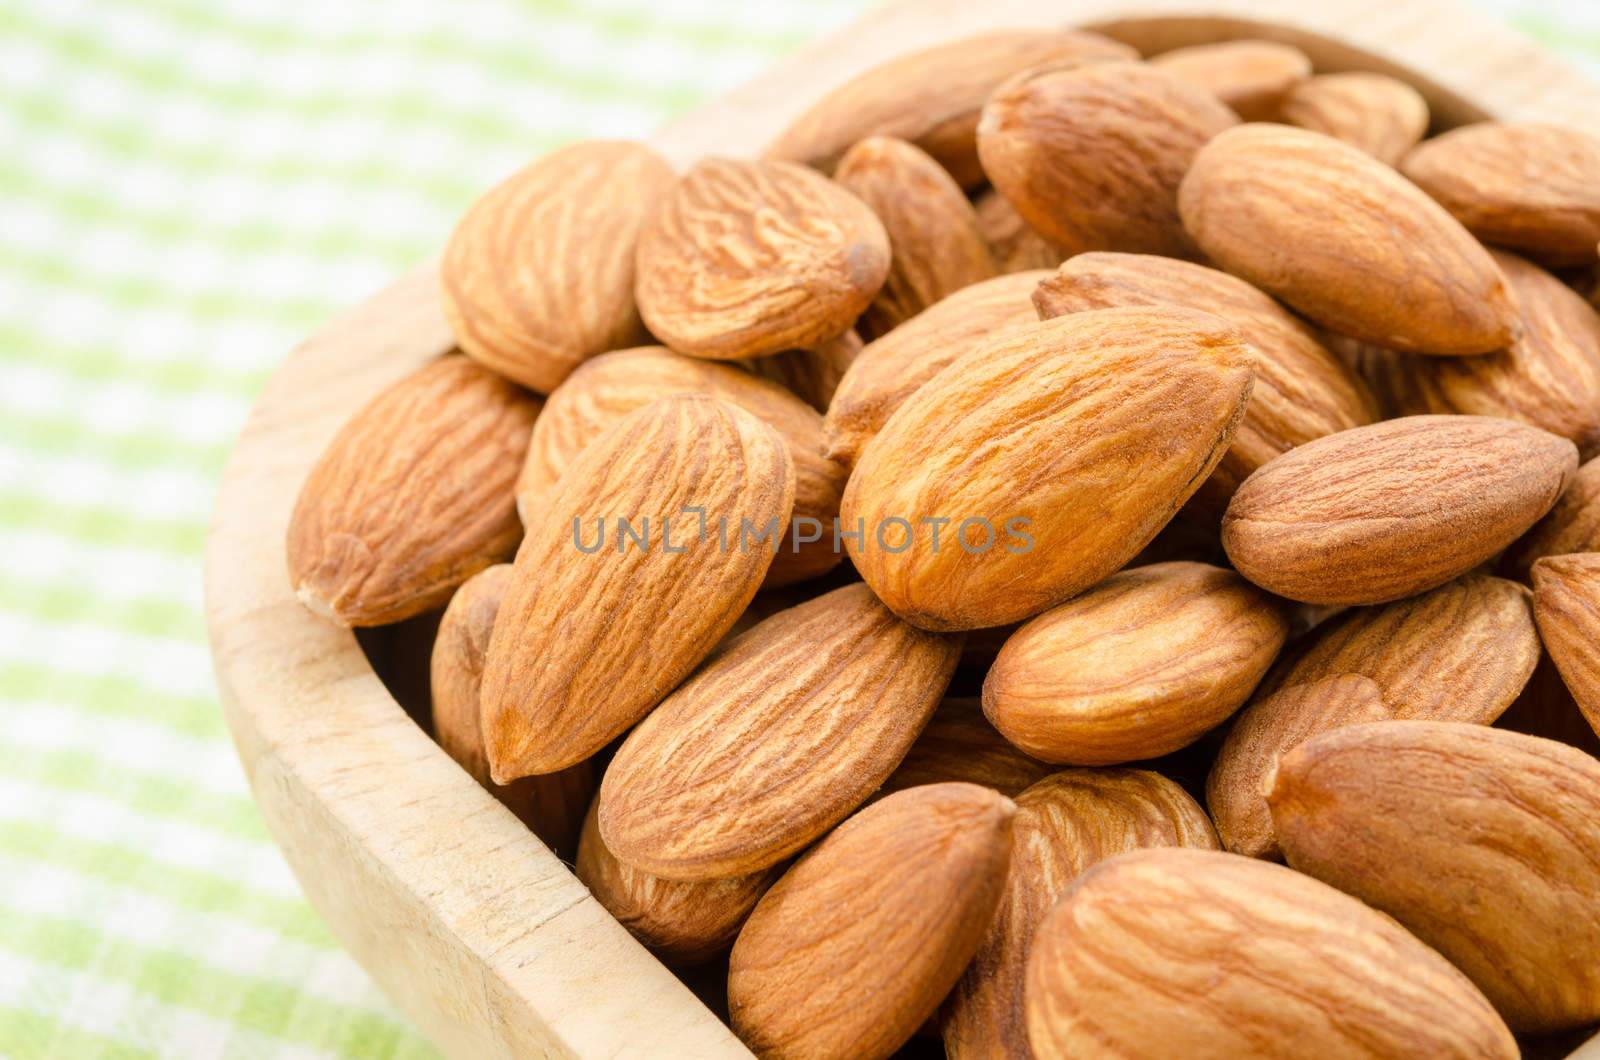 Almonds in wooden cup on green tablecloth.